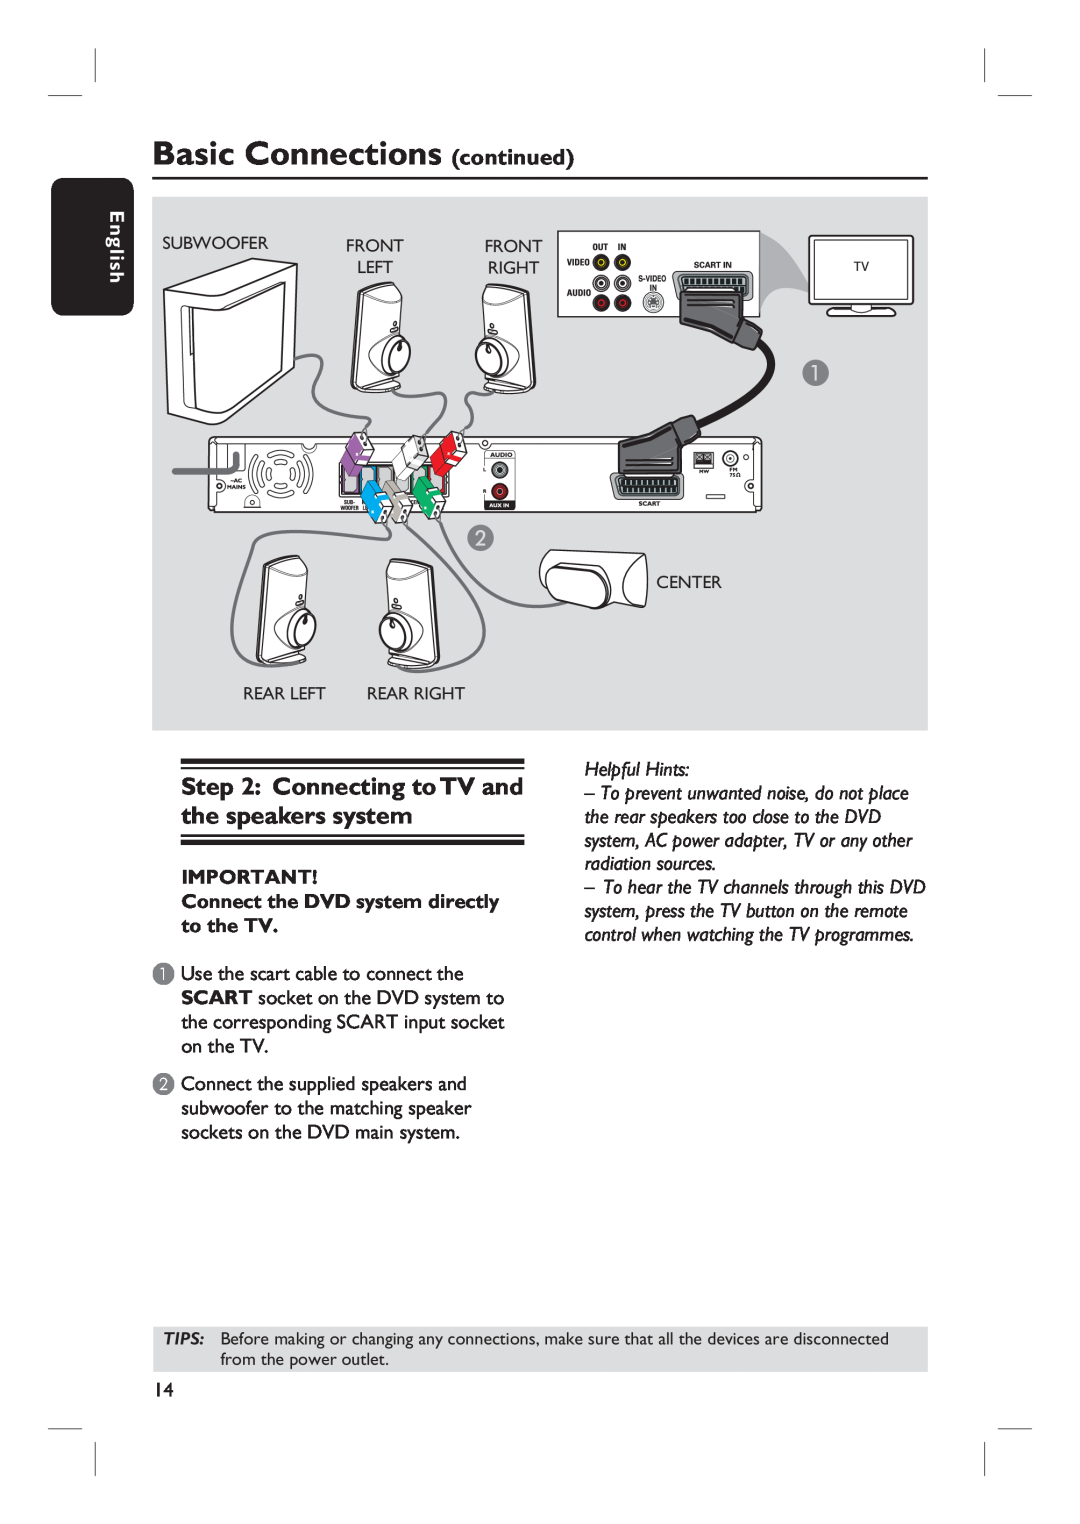 Philips HTS3100 user manual Basic Connections continued, Connecting to TV and the speakers system, English, Helpful Hints 